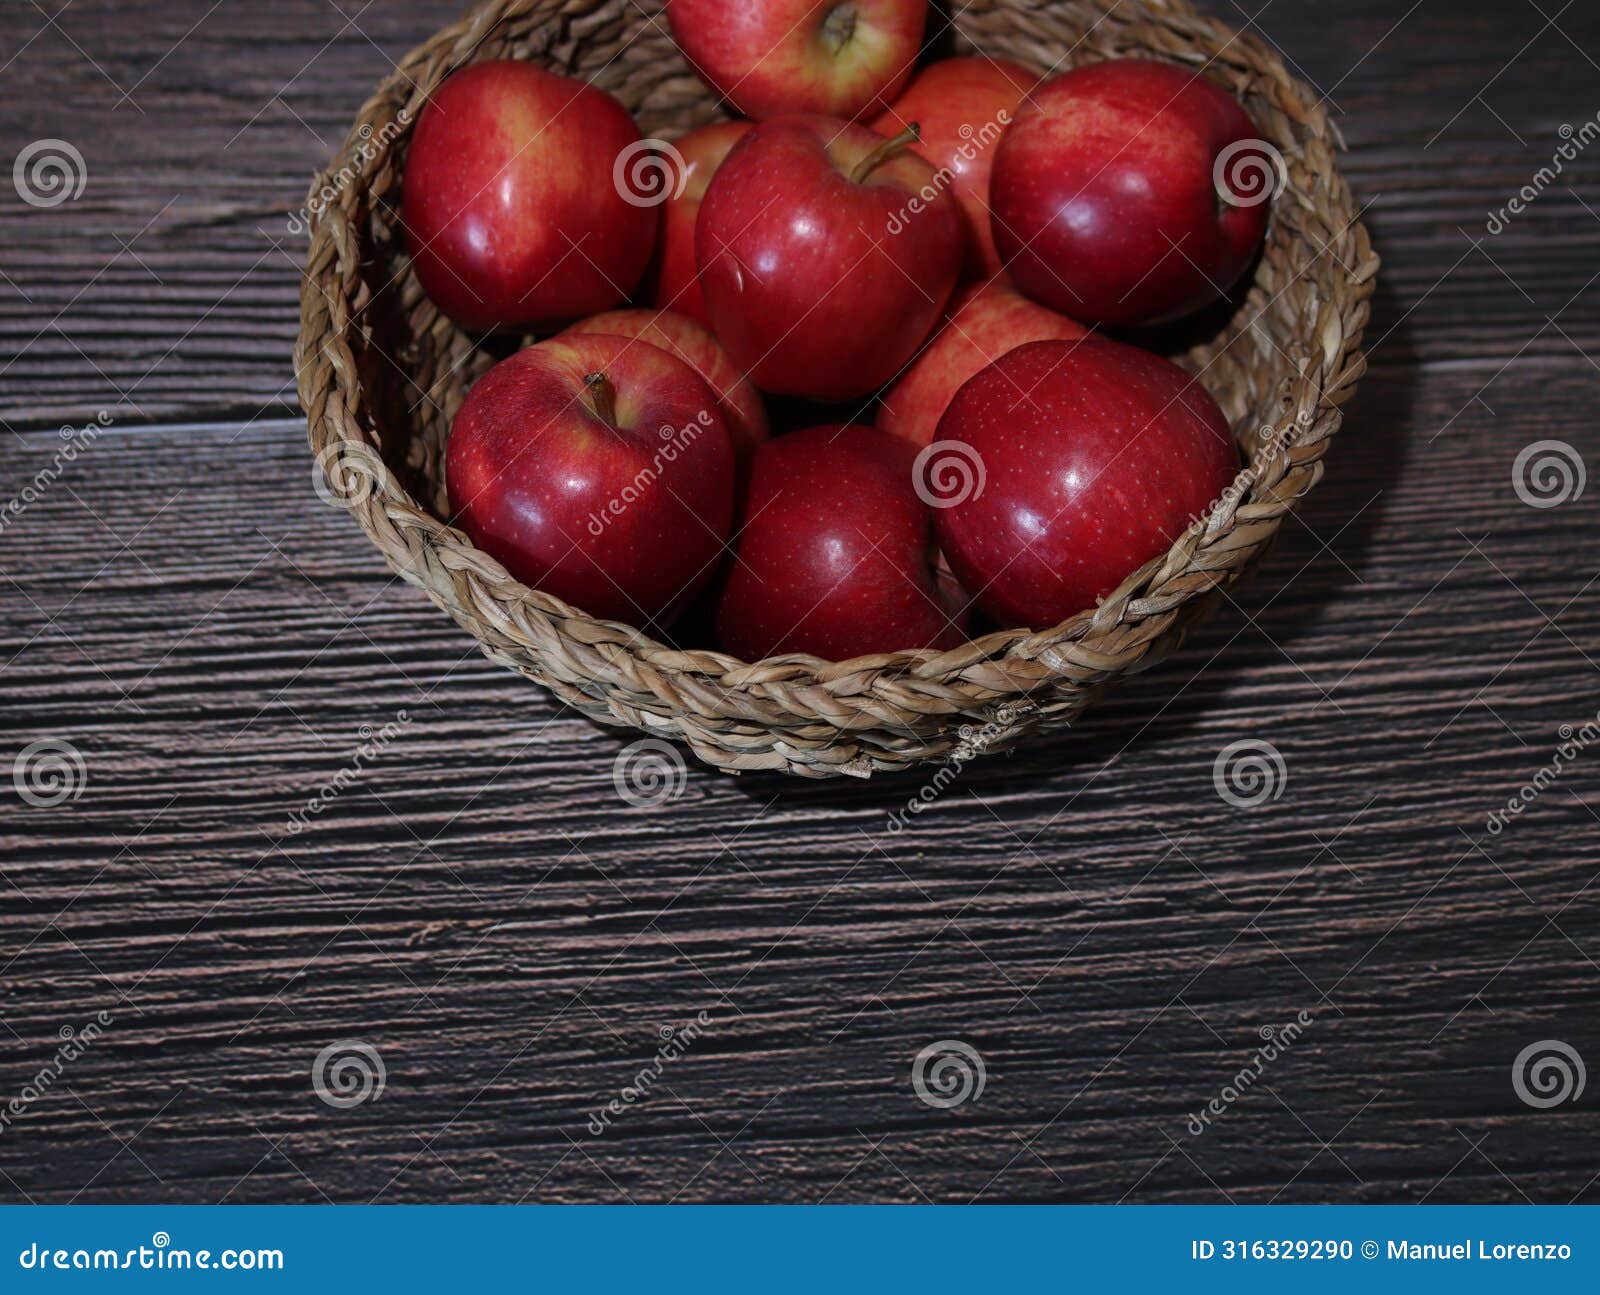 delicious appetizing red apples natural fruit delicacy